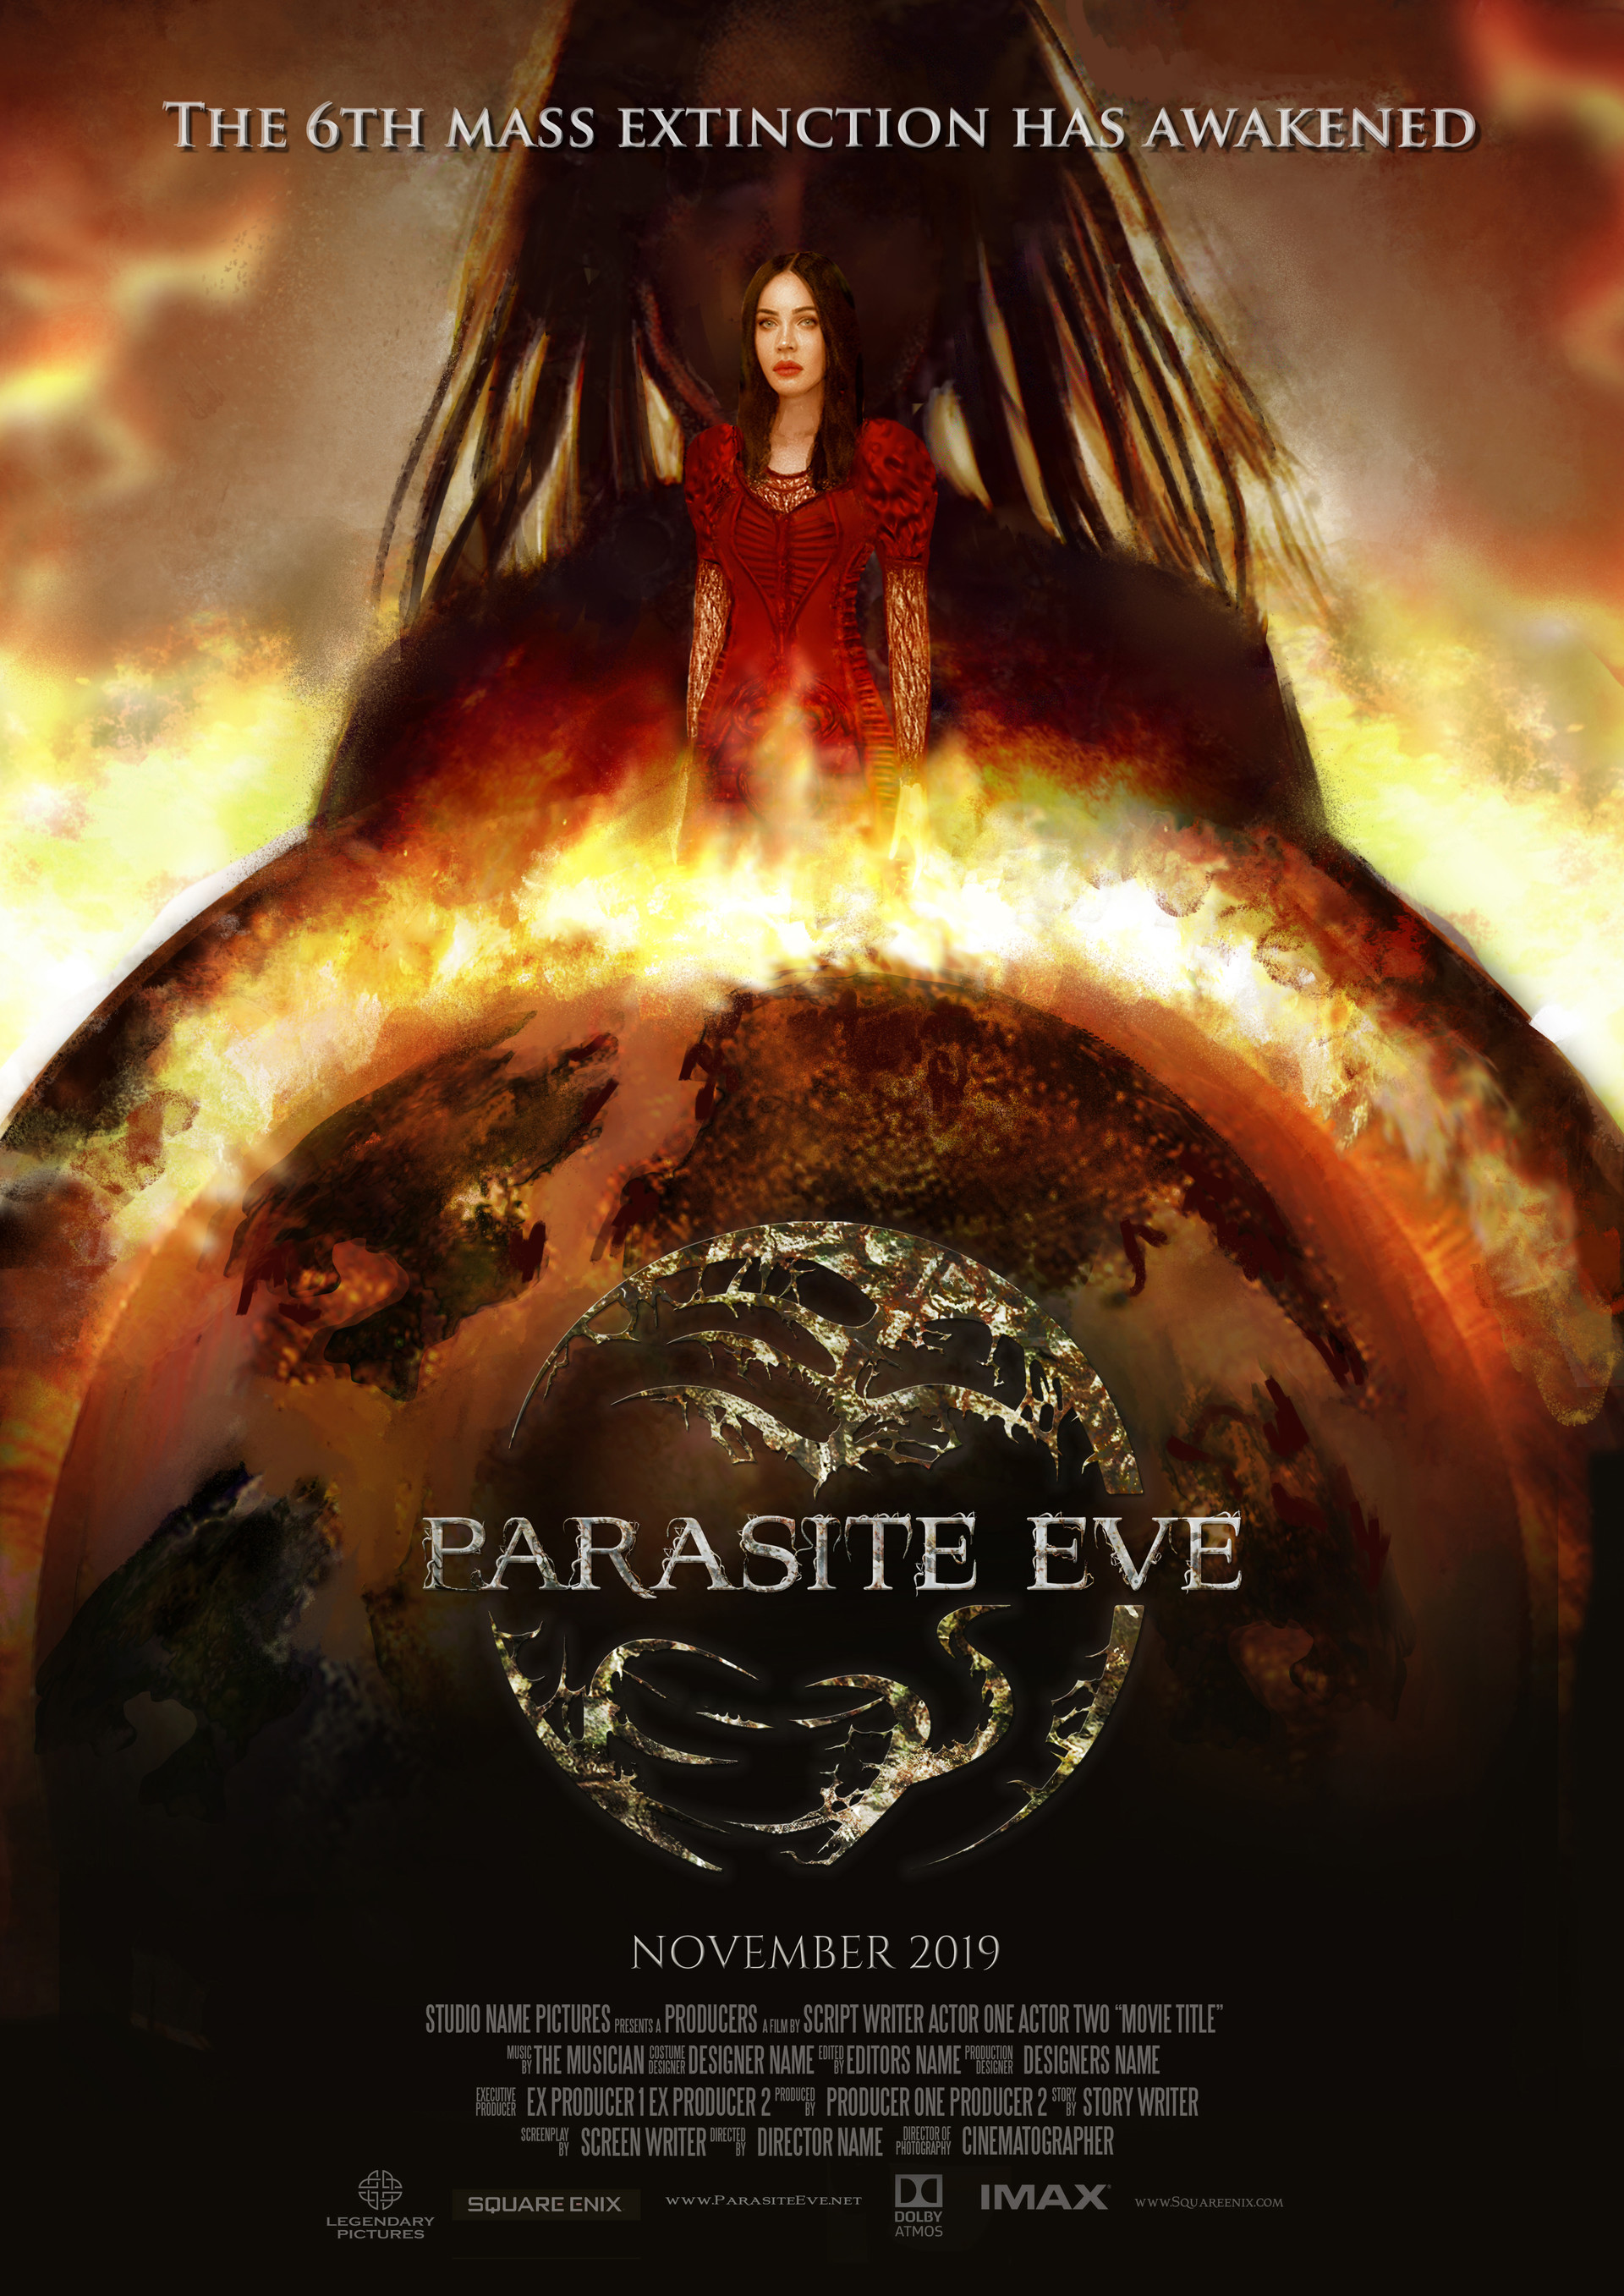 Parasite Eve 2 Artwork- Limited Edition, Perfect Gift Art Print for Sale  by etoriuz